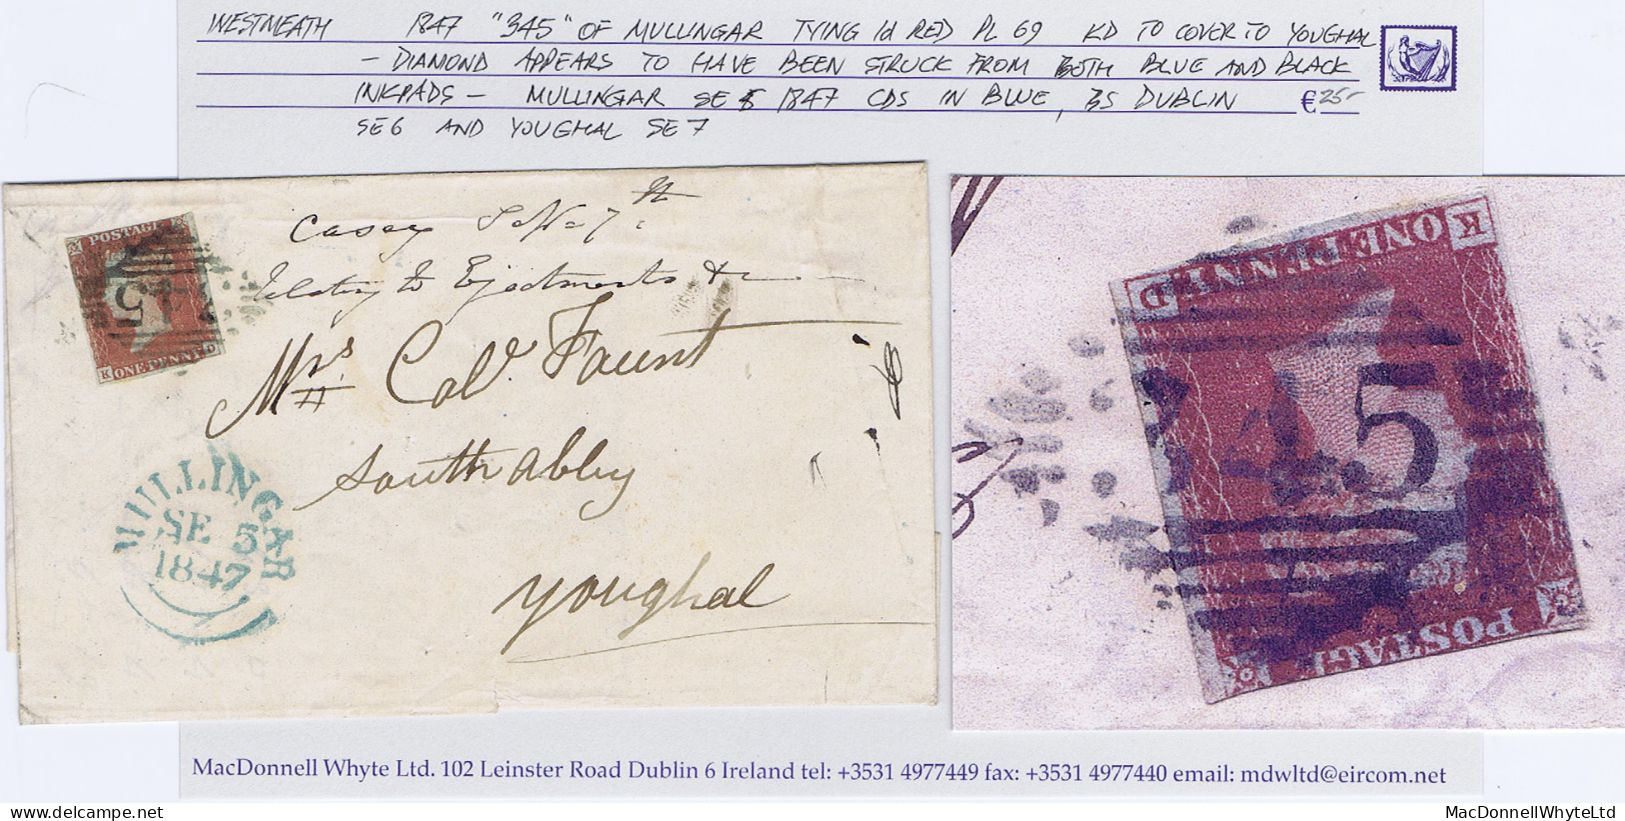 Ireland Westmeath 1847 Cover To Youghal With 1d Red Plate 69 KD Tied By "345" Of Mullingar, Green MULLINGAR SE 5 1847 Be - Prephilately